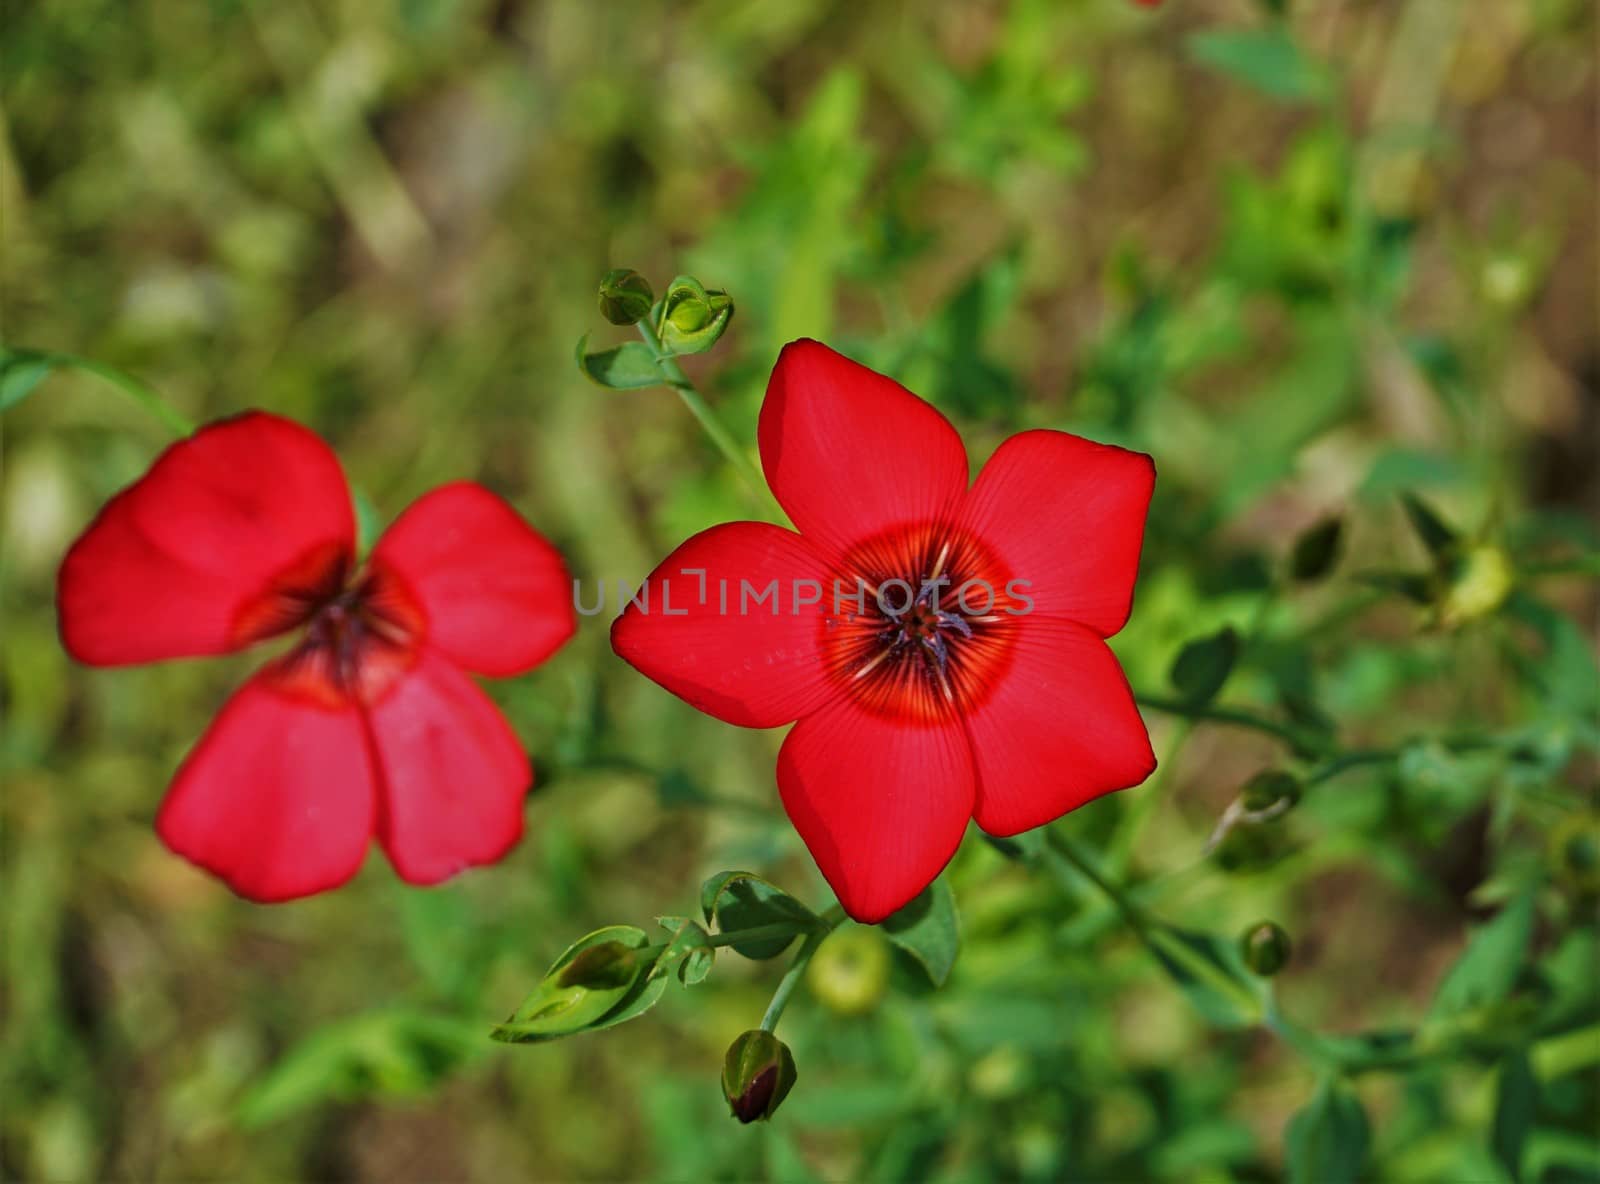 Horizontal image of a red blooming Adonis flower by pisces2386